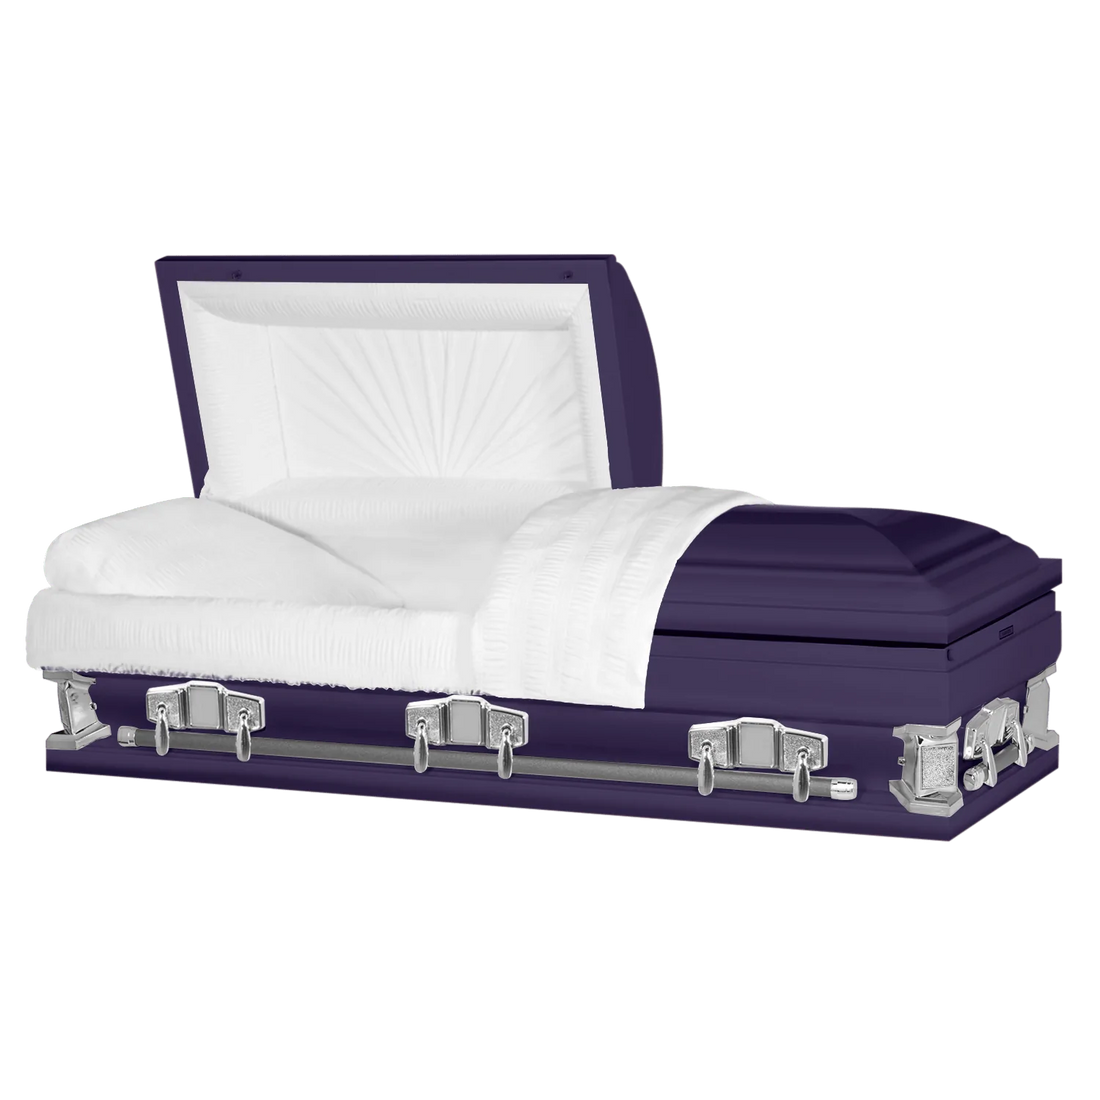 When and how to buy a purple color casket?